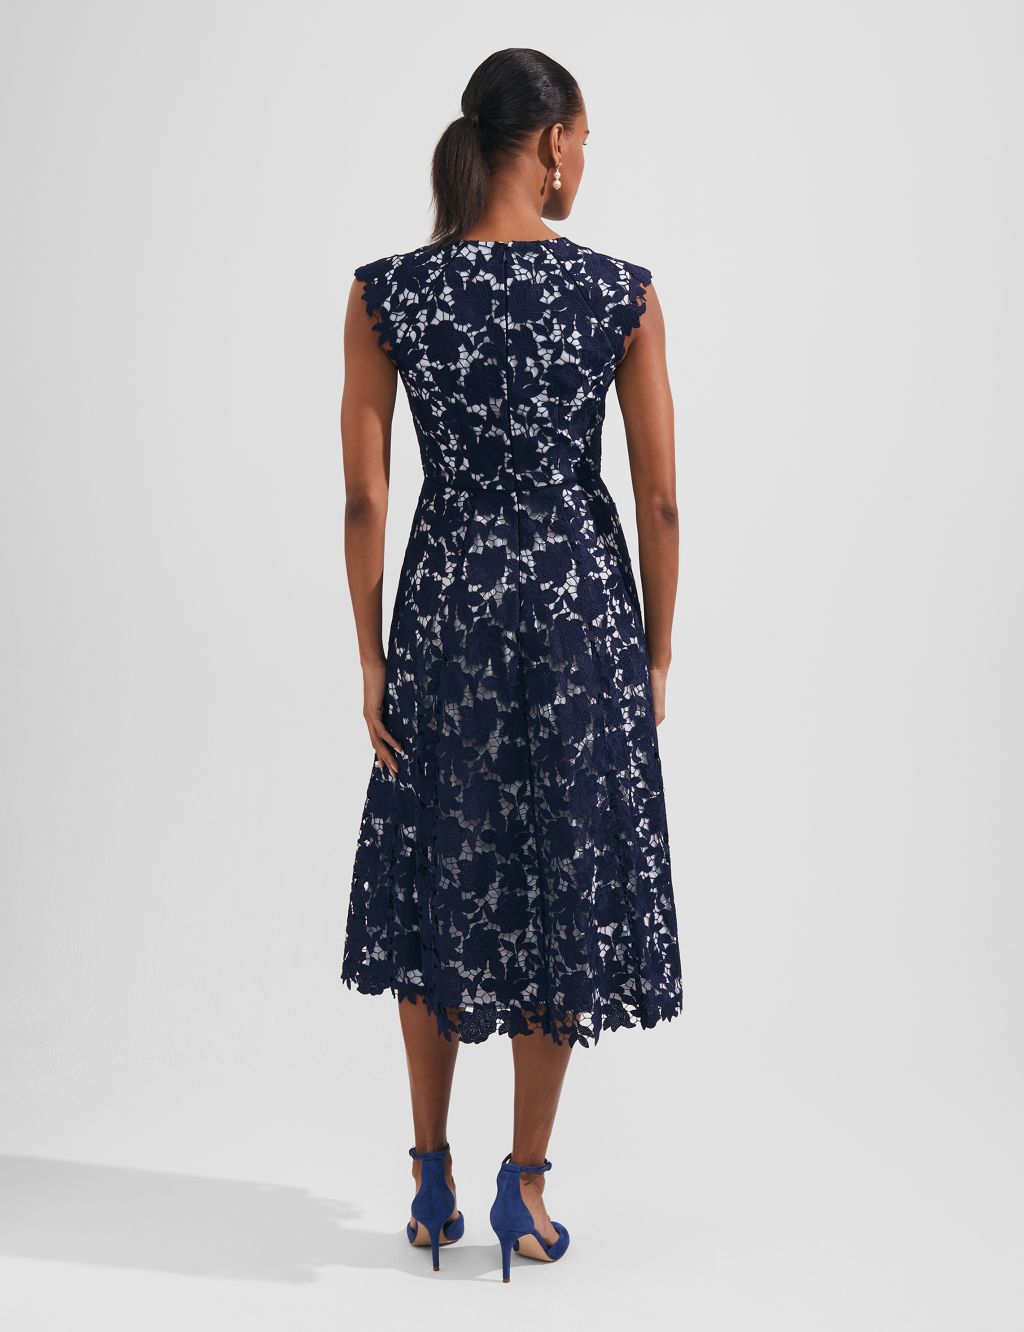 Lace Embroidered Midi Swing Dress image 4